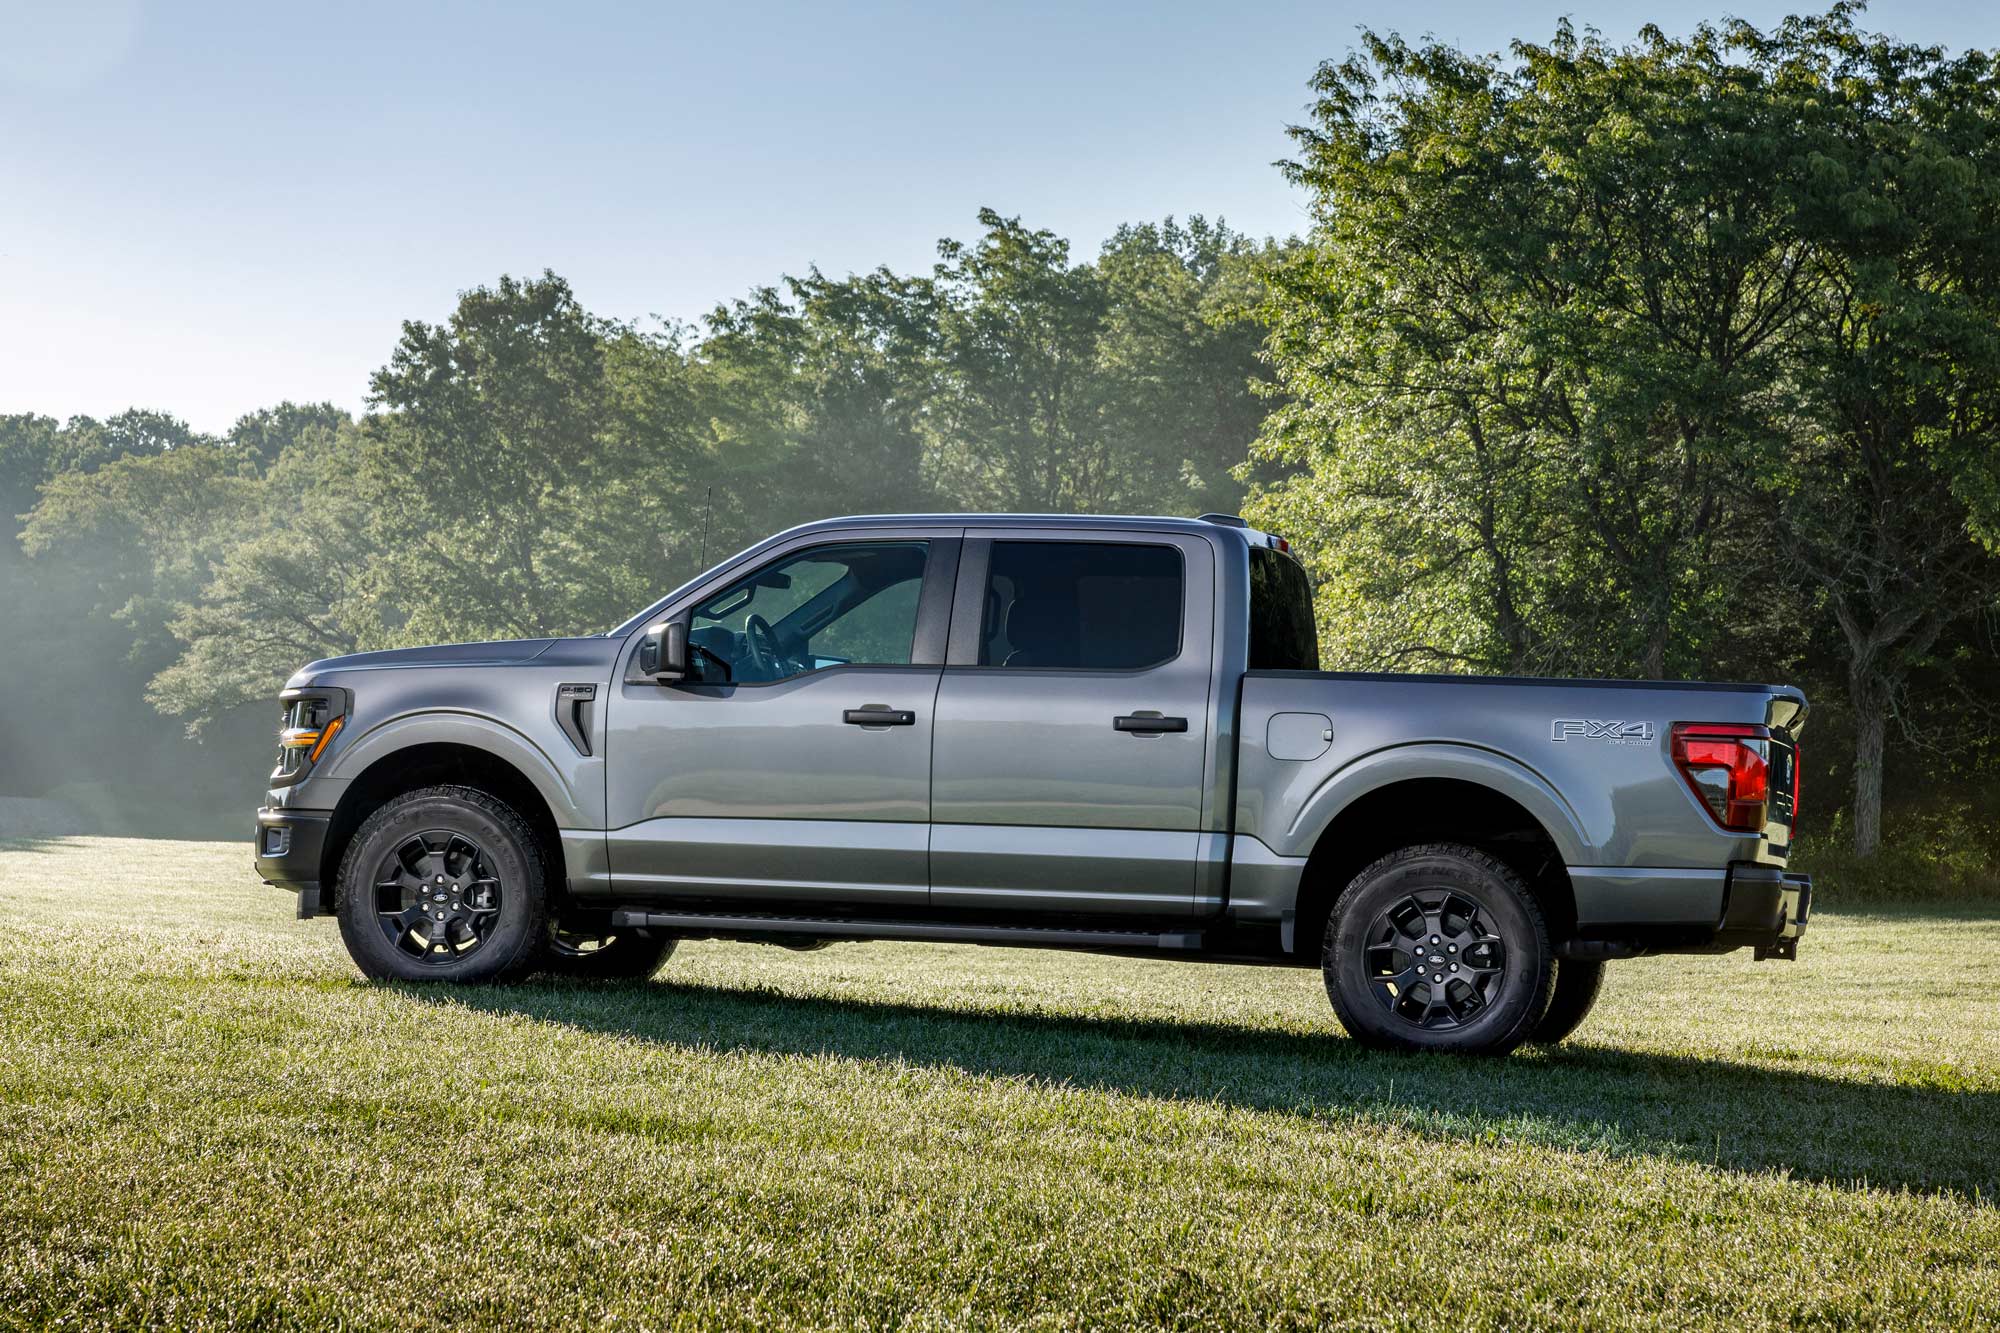 Gray Ford F-150 FX4 parked on grass lawn.